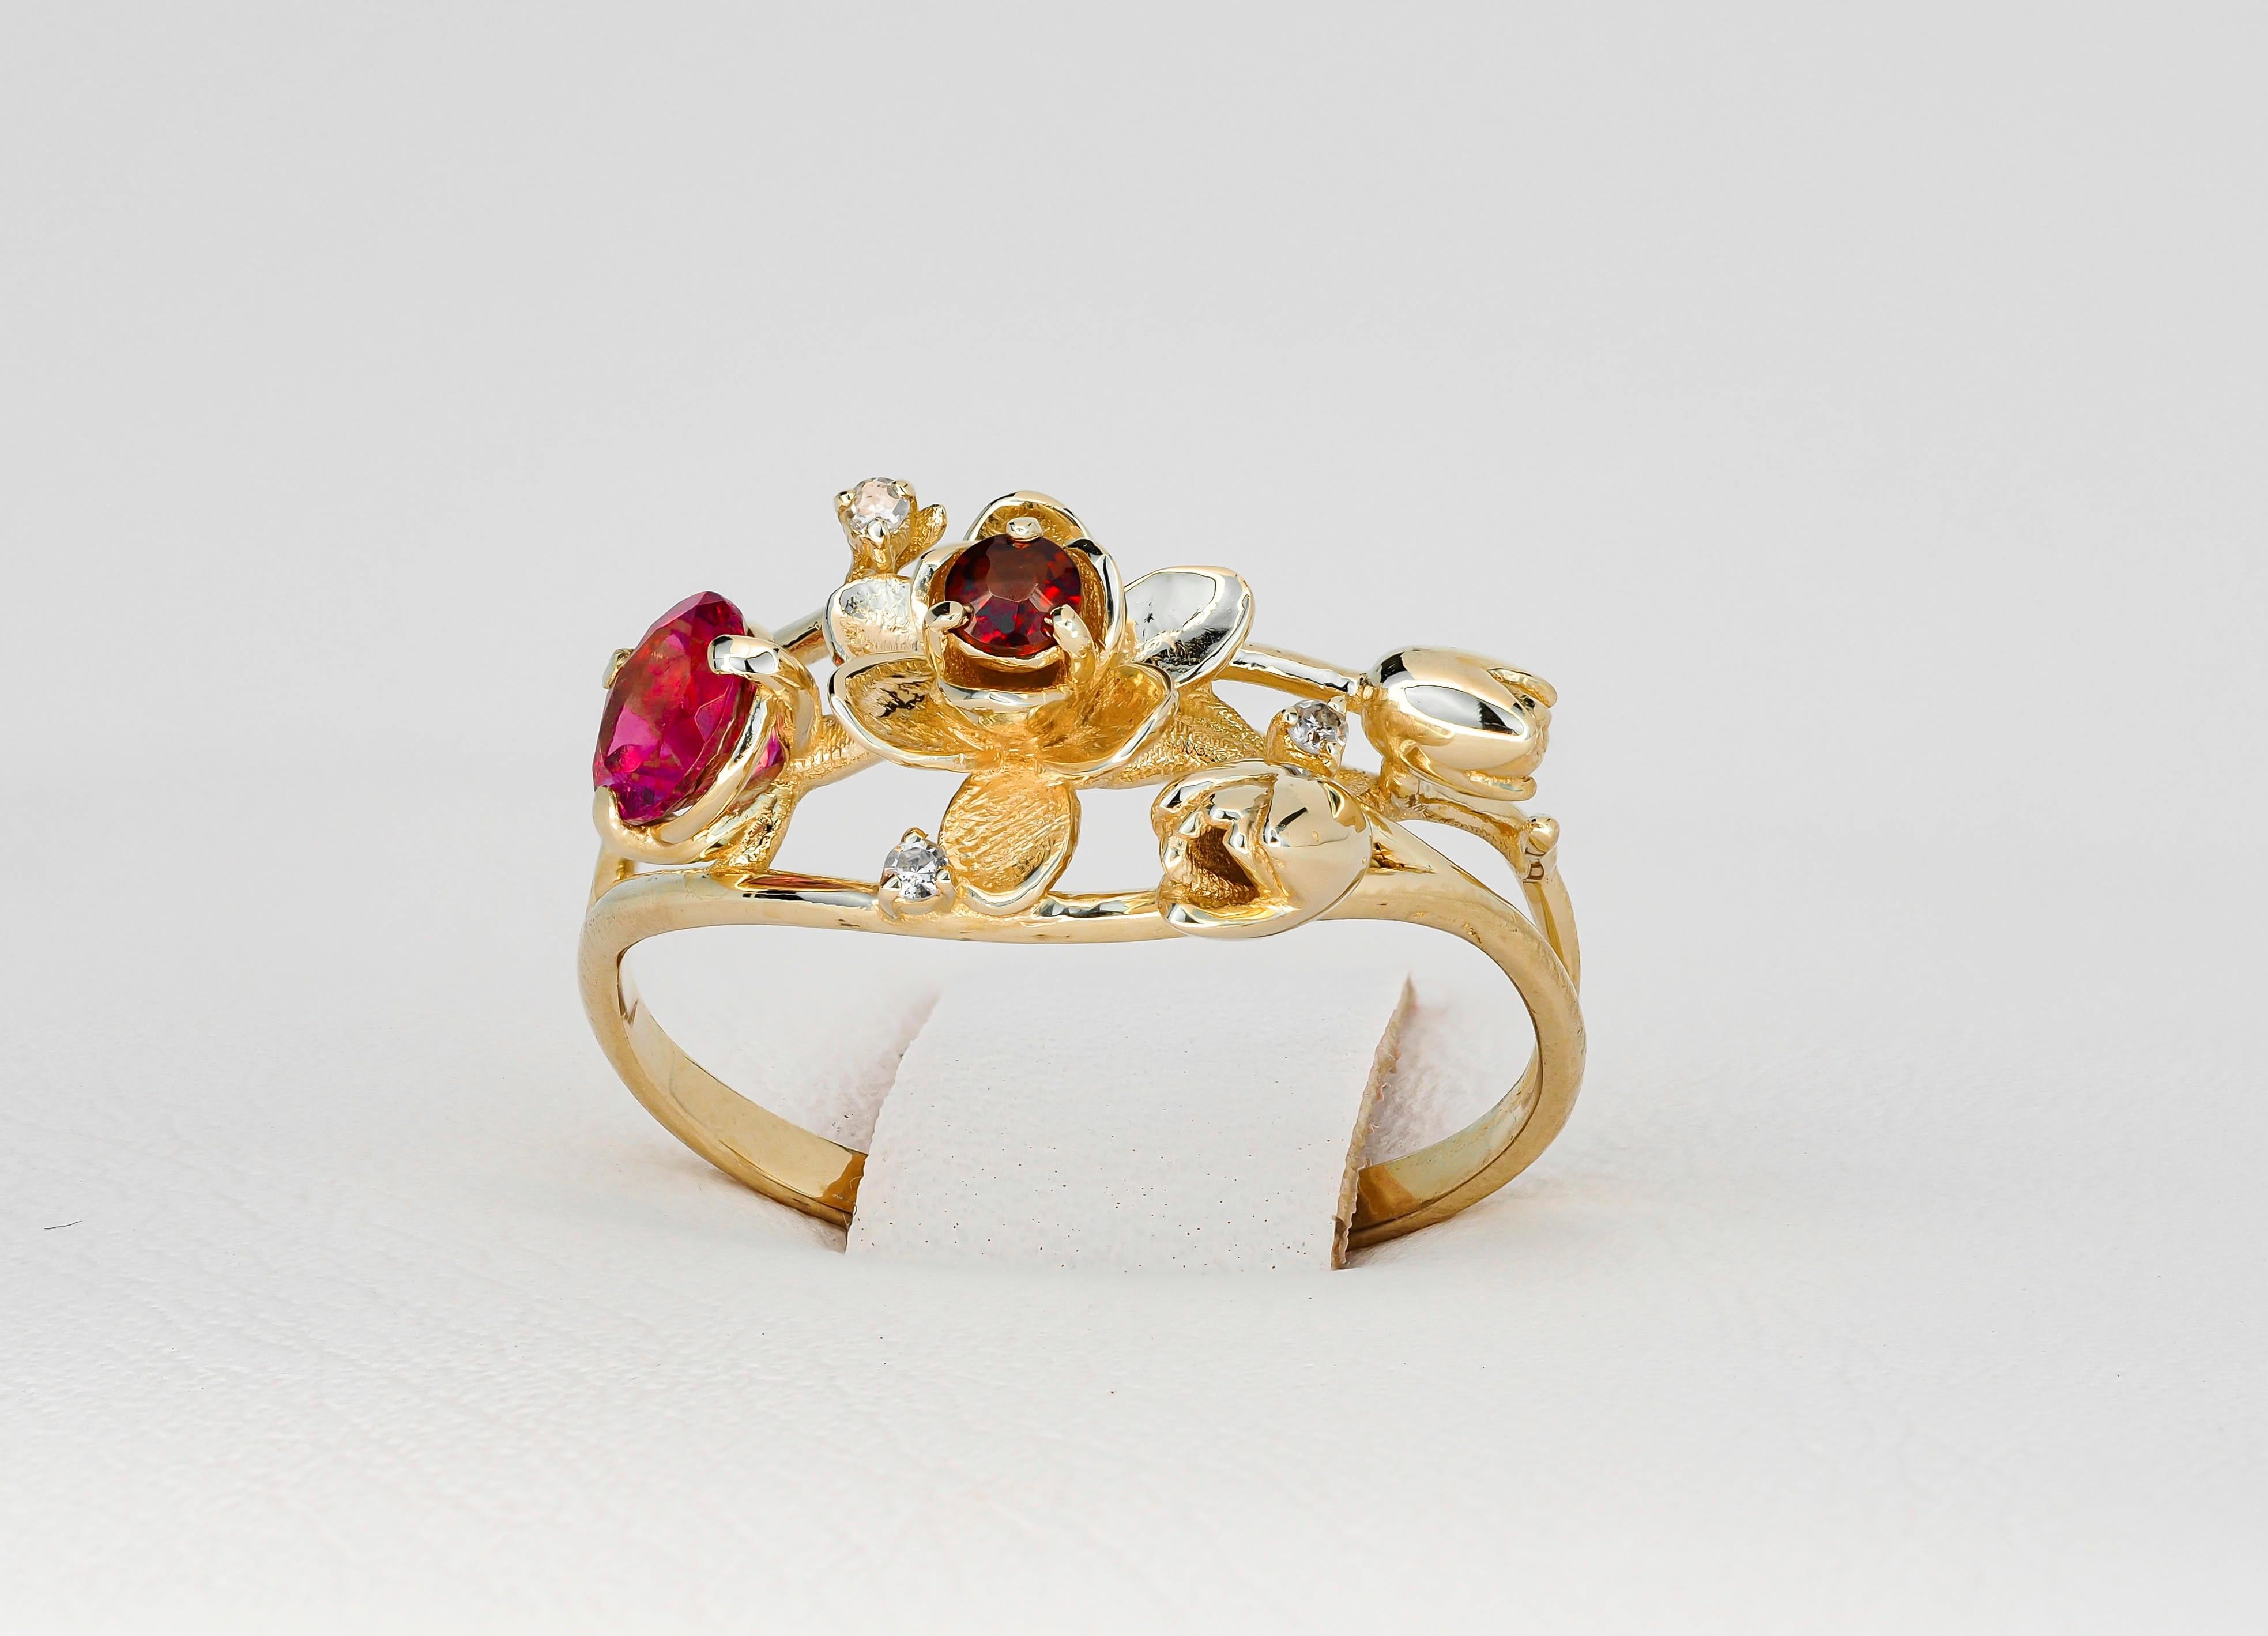 For Sale:  Ruby ring. 14k Gold Ring with Ruby, Garnet and Diamonds. Orchid Flower Ring. 6